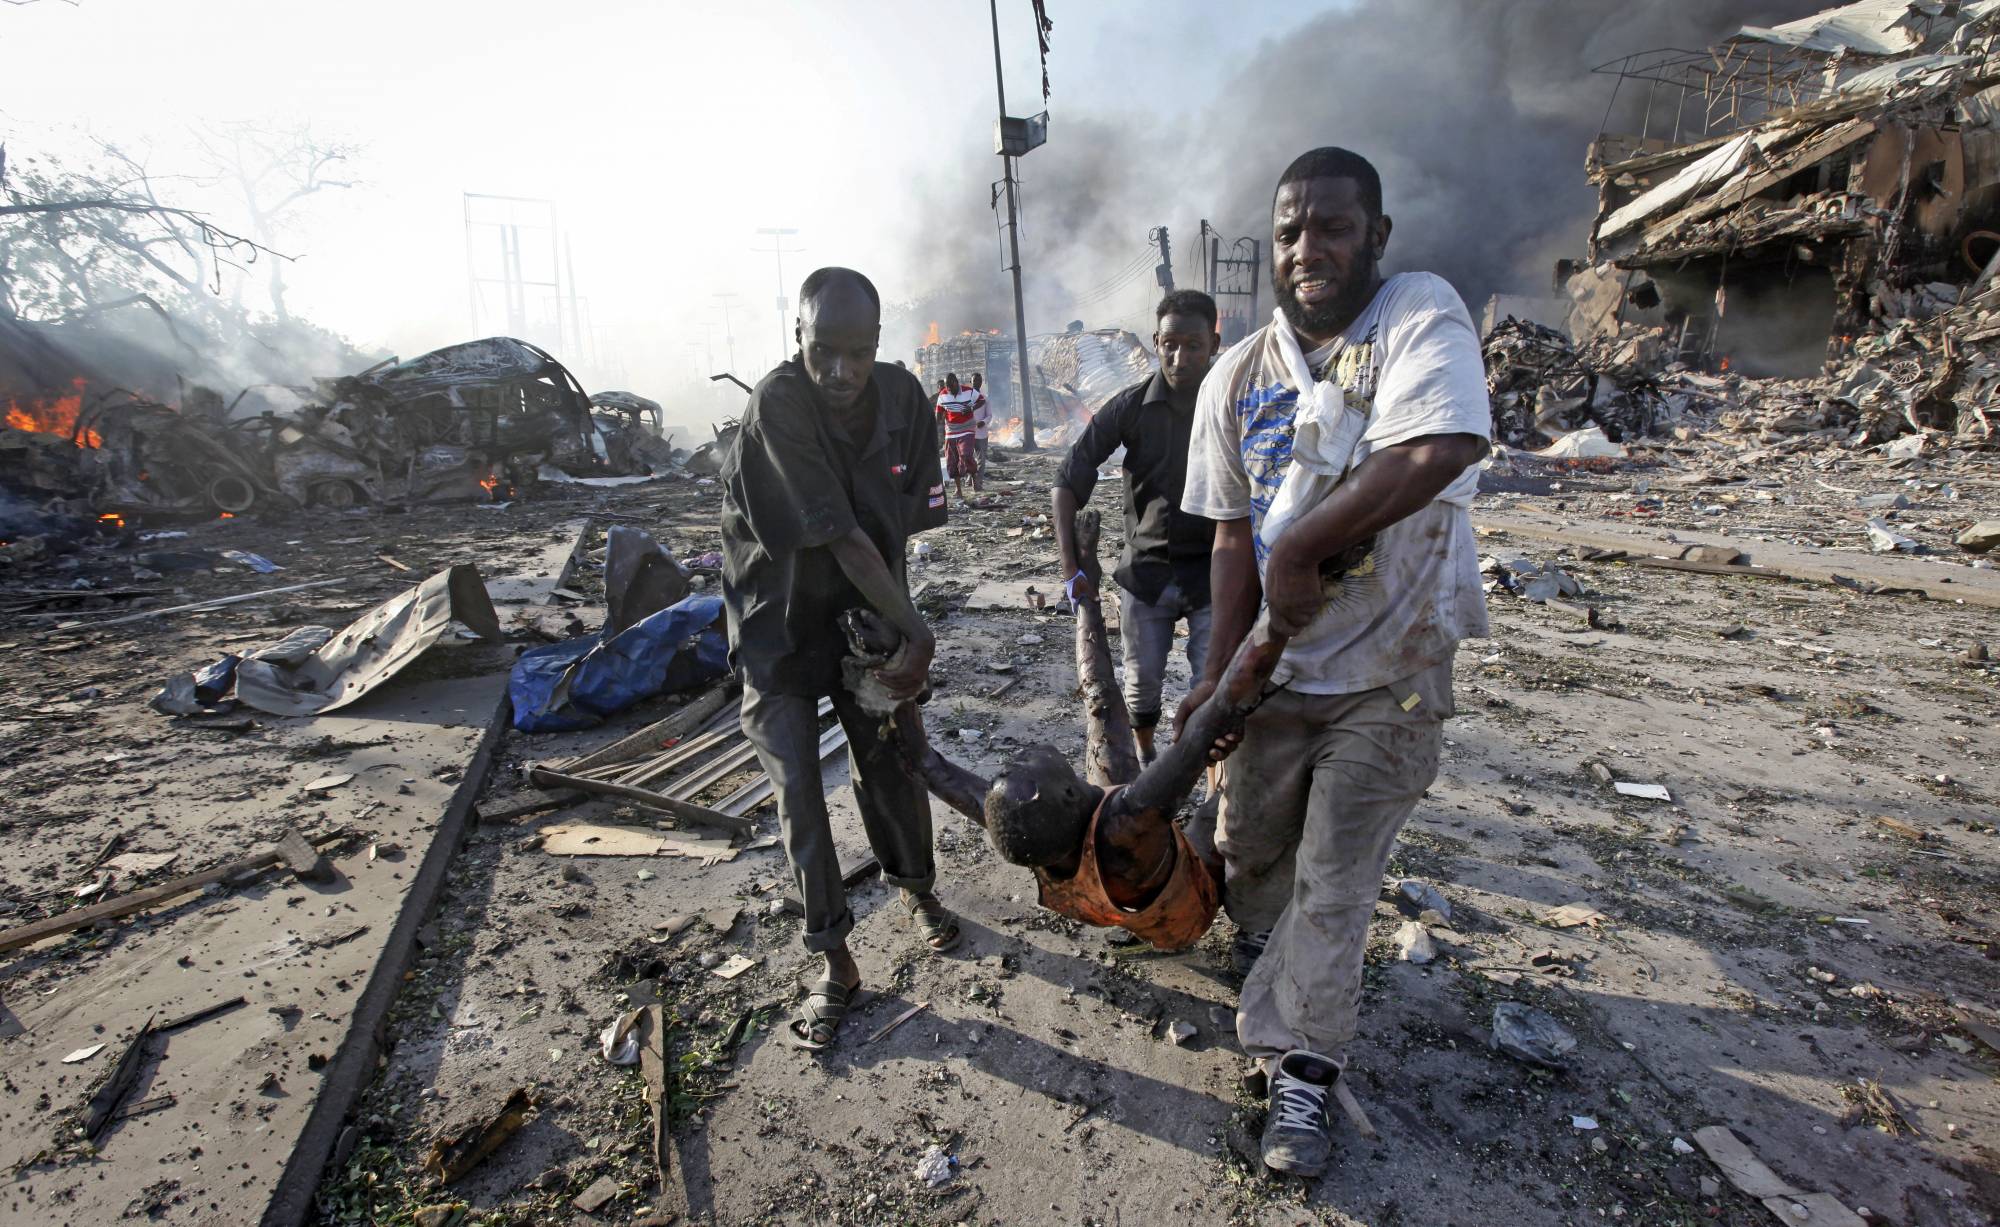 FILE - In this Oct. 14, 2017, file photo, Somalis remove the body of a man killed in a huge explosion blast in the capital Mogadishu, Somalia. Countless members of Somalia's vast diaspora have returned to Somalia in recent years to help rebuild their homeland after decades of civil war. Some who spoke to The Associated Press say they won't be deterred by the Oct. 14 bombing that killed more than 300. Instead, they say the attack marks a turning point, and is a call for all Somalis to work toward peace. (AP Photo/Farah Abdi Warsameh, File)